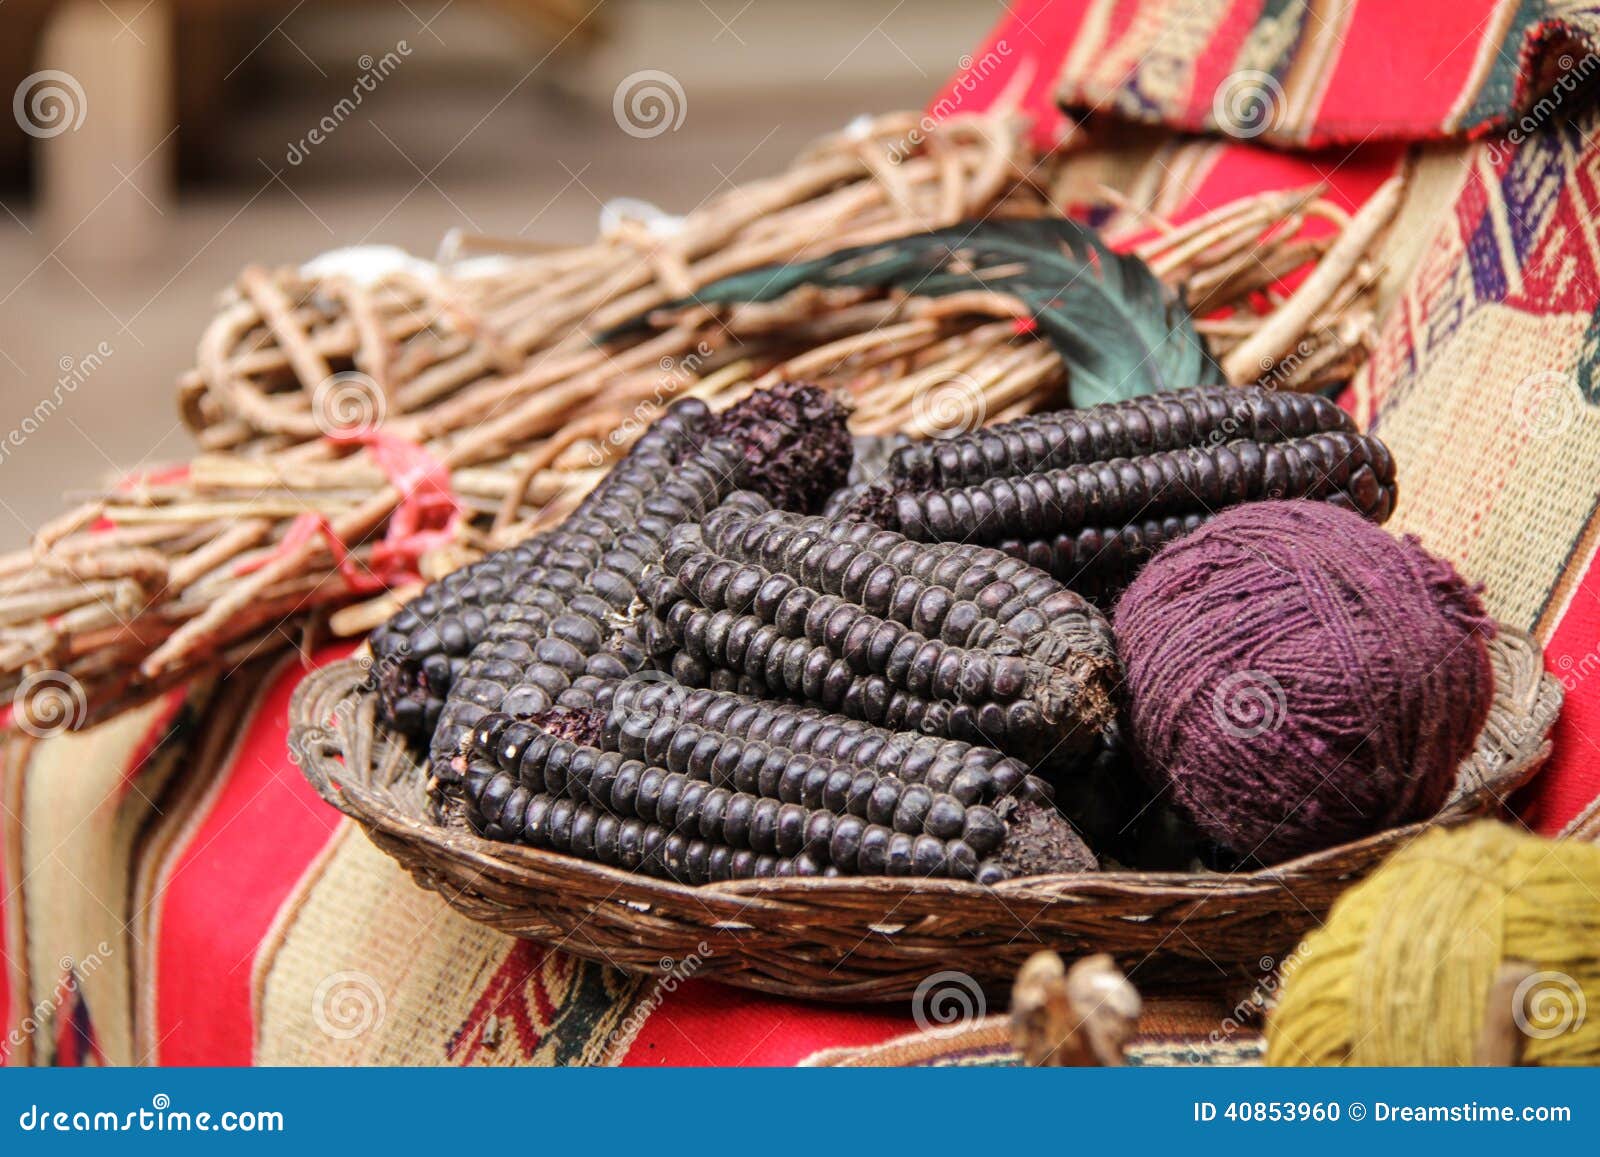 purple maize use as natural dyes